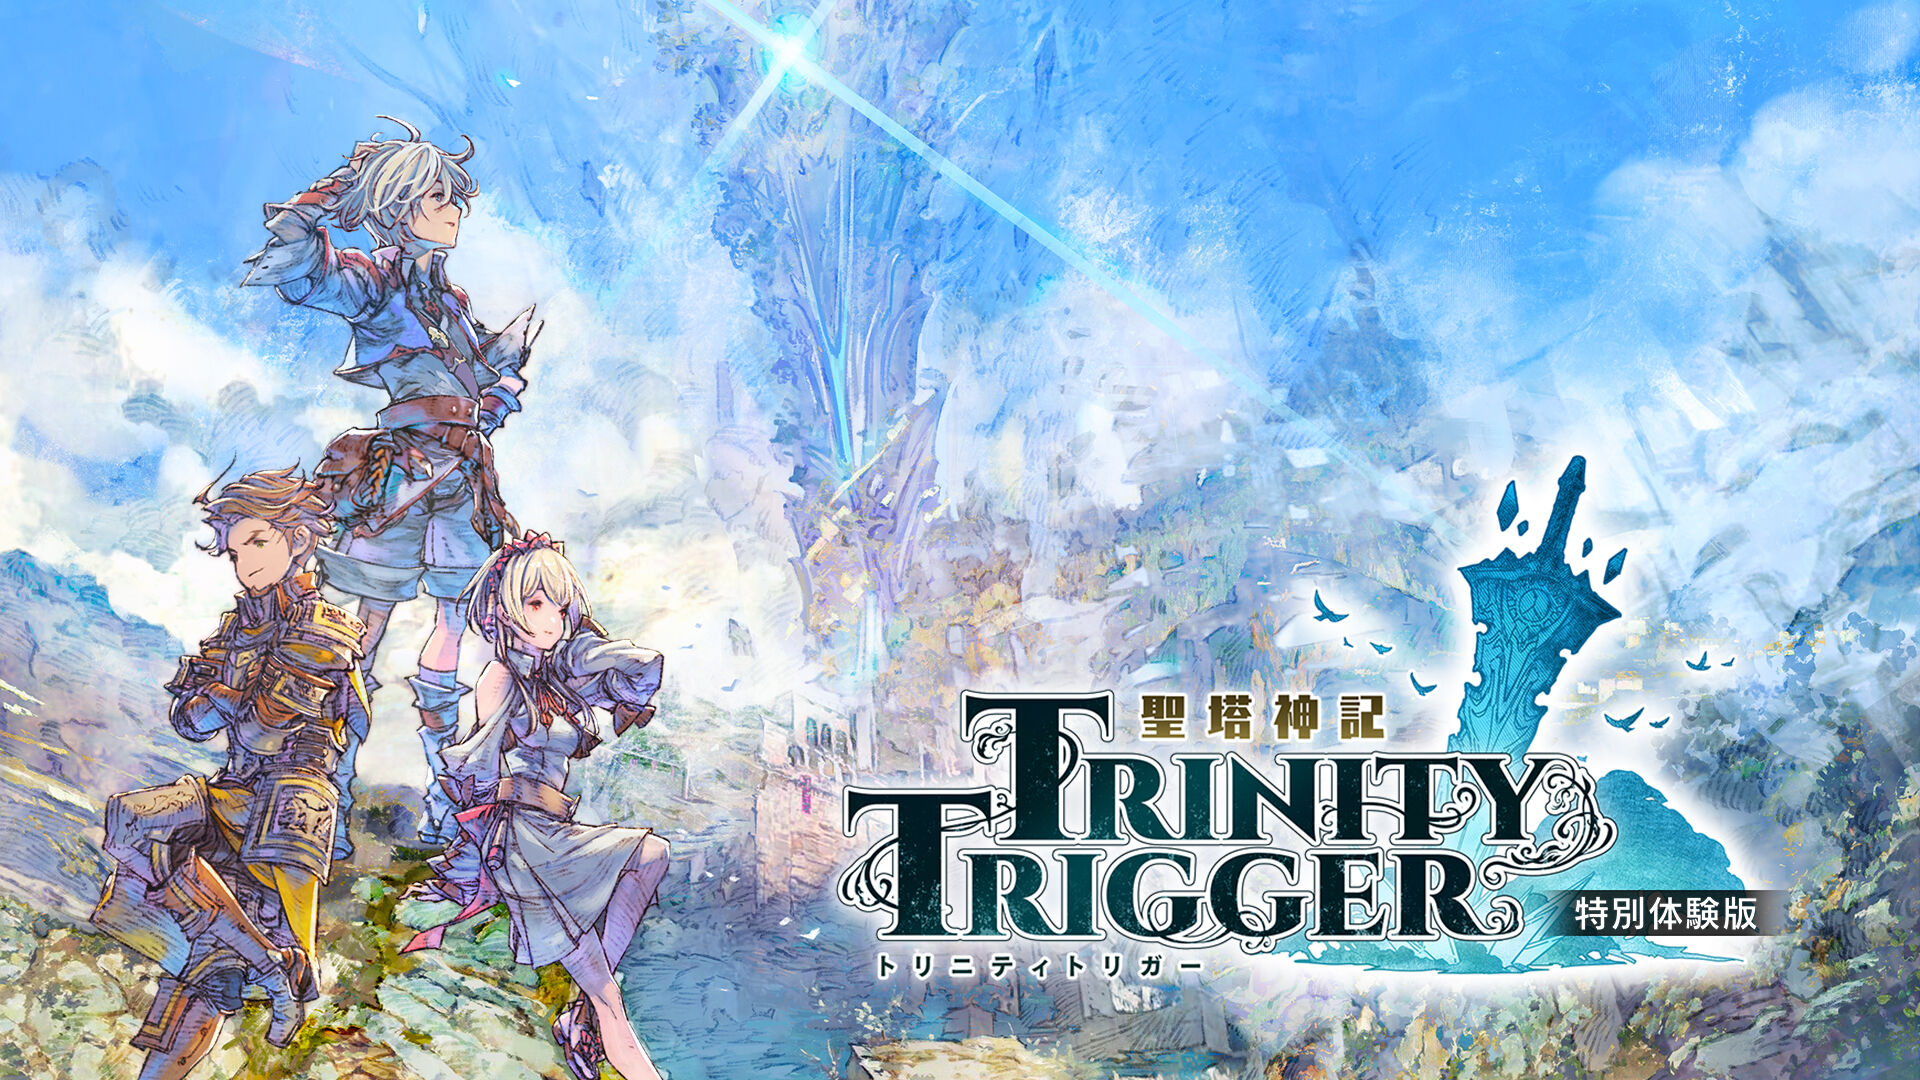 Watch now the first gameplay of JRPG from a small dream team • JPGAMES.DE